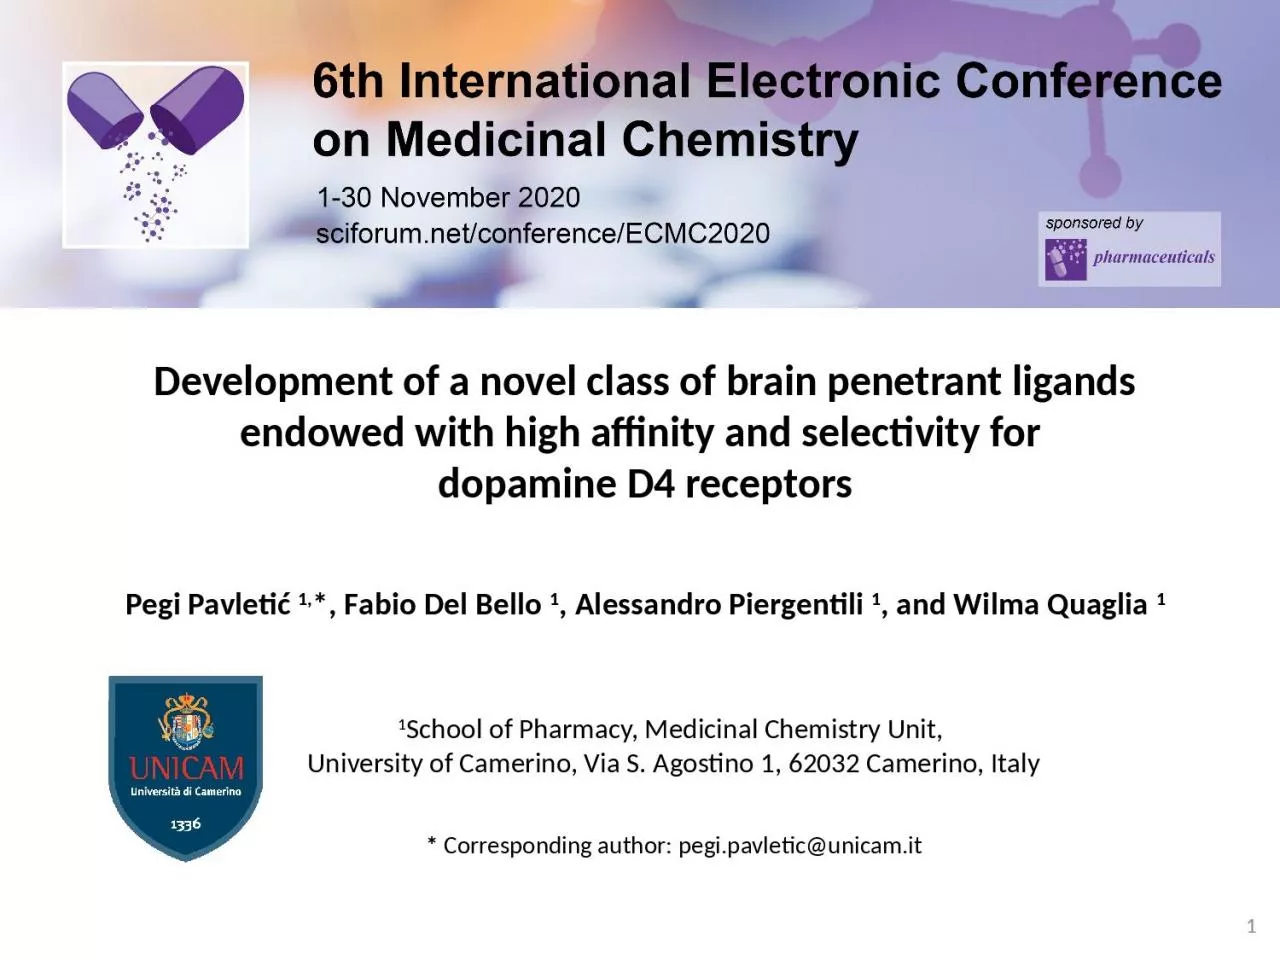 Development of a novel class of brain penetrant ligands endowed with high affinity and